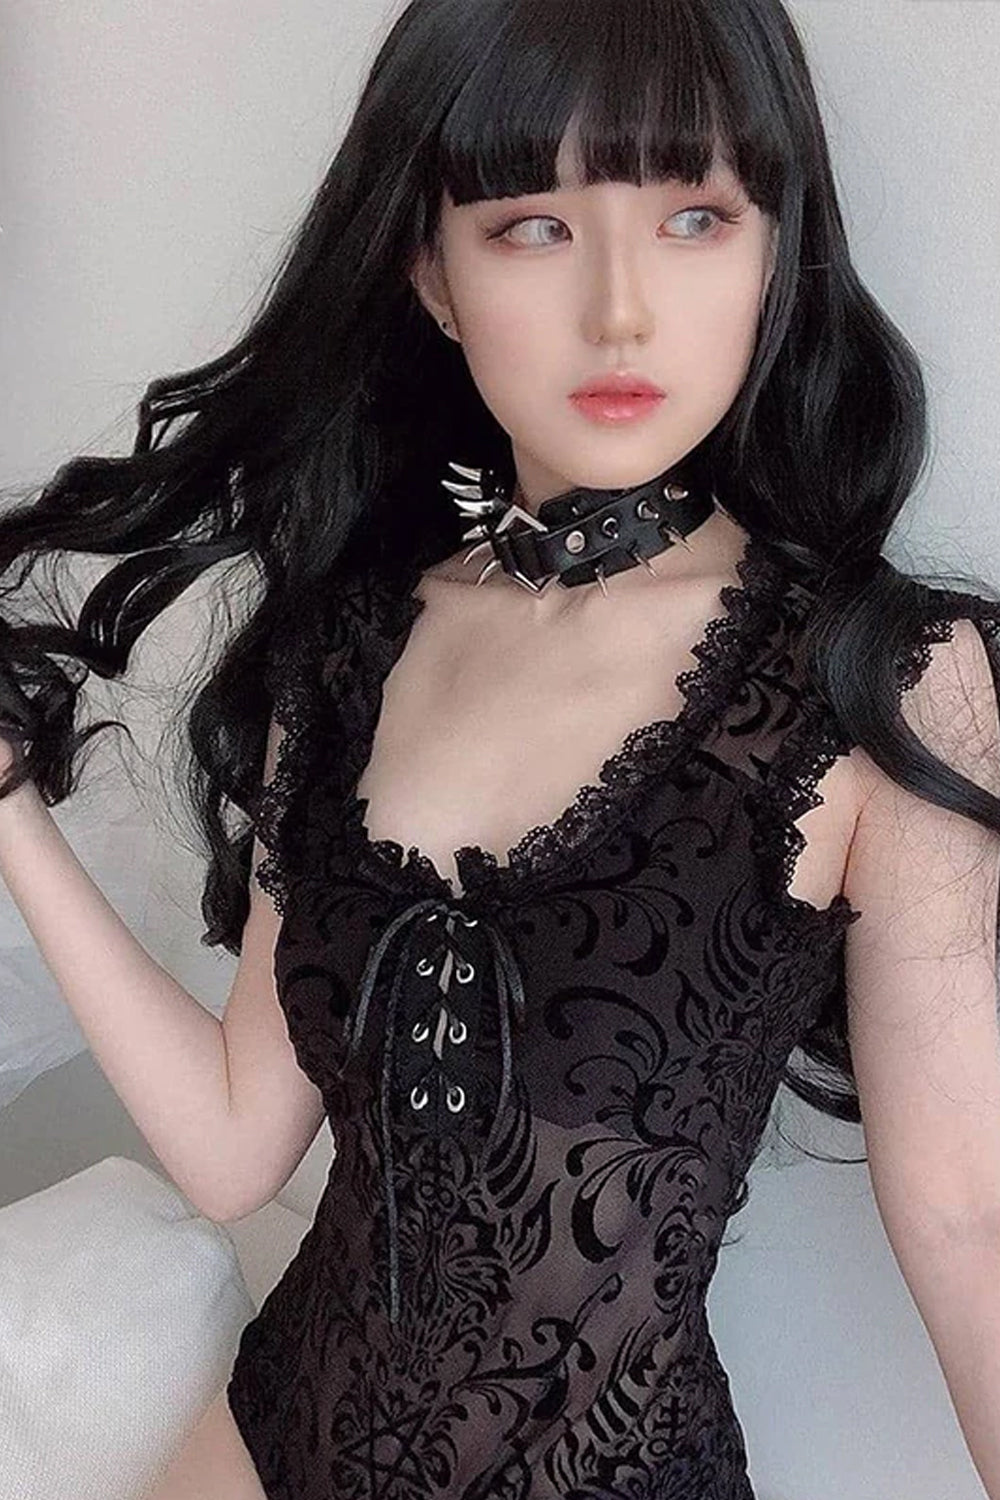 Sexy Lace Hollow Out Gothic Style Bodysuit